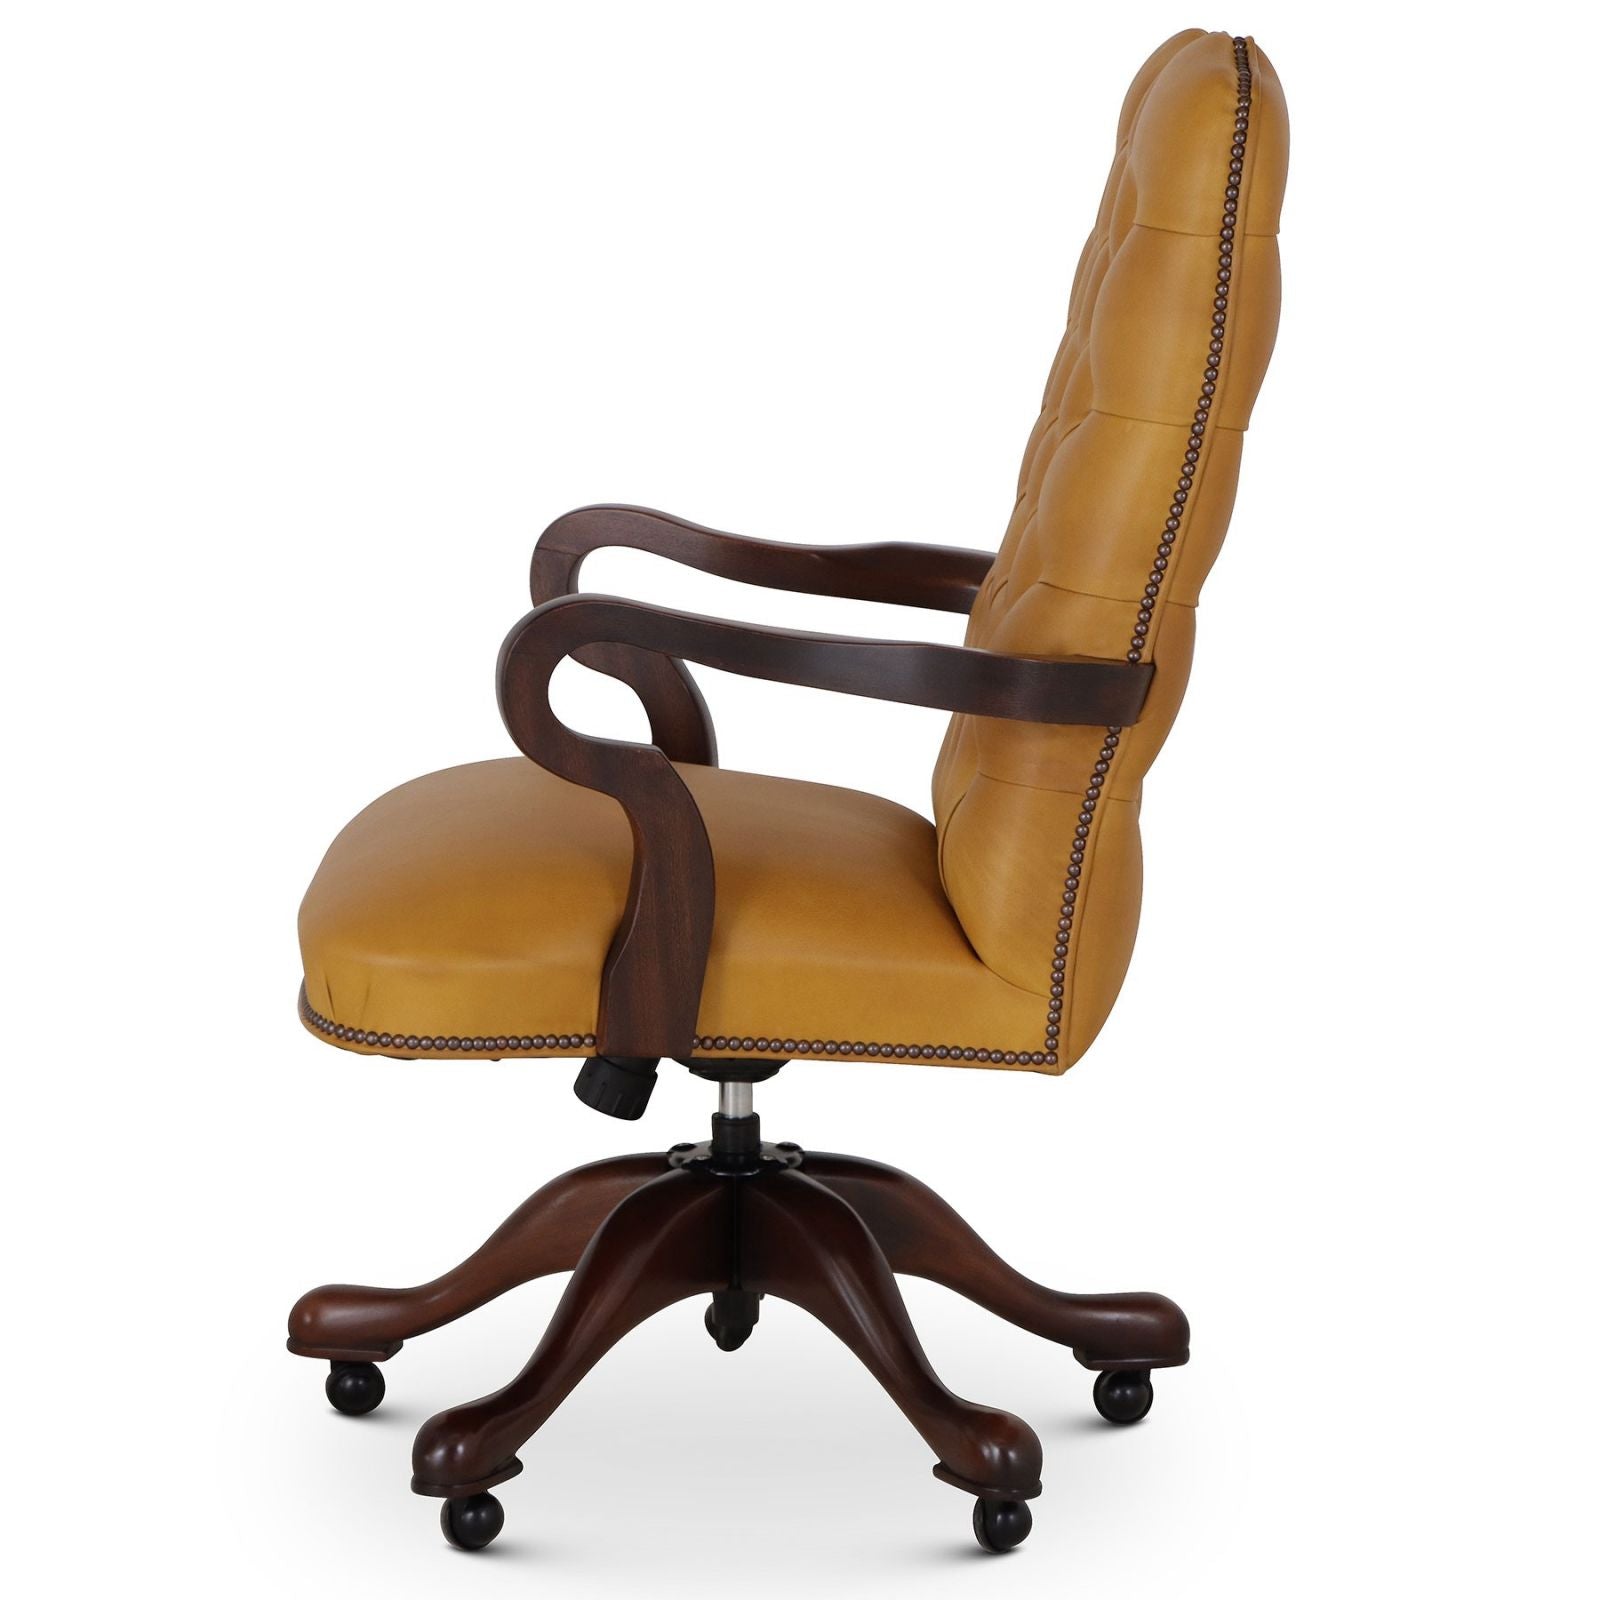 Swan buttoned leather swivel chair - Grande Sycamore